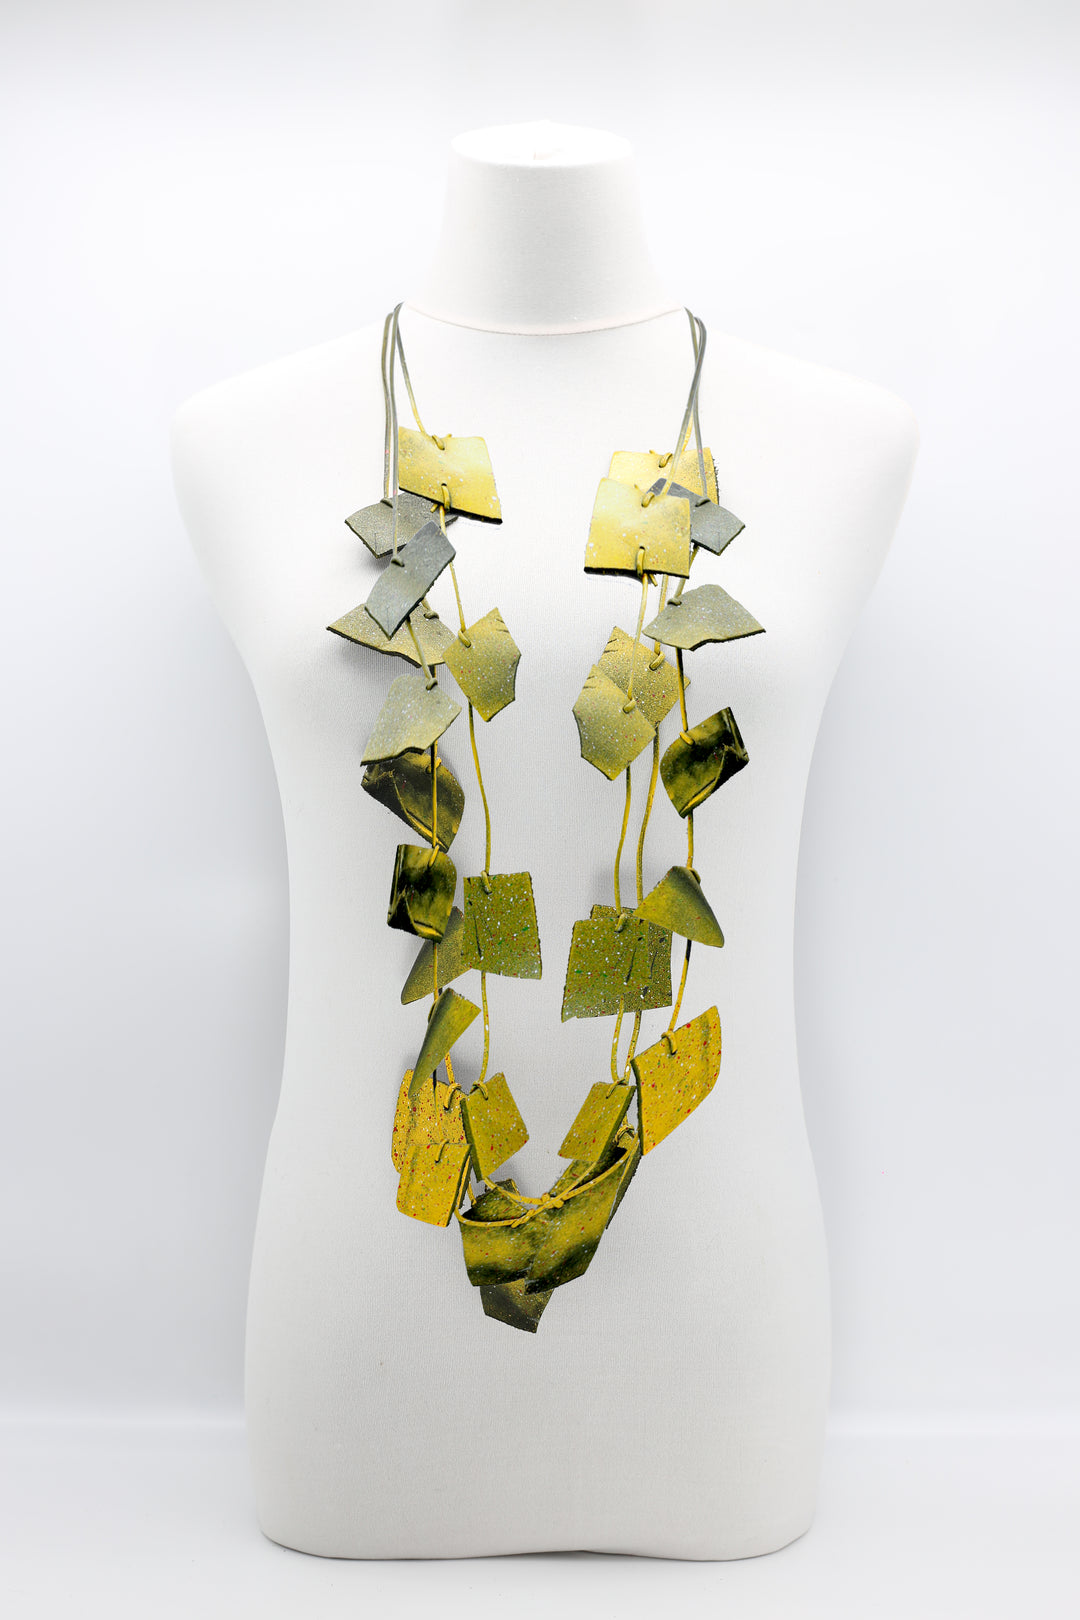 3-strand Recycled Leather Necklaces - Hand painted Yellow Graffiti